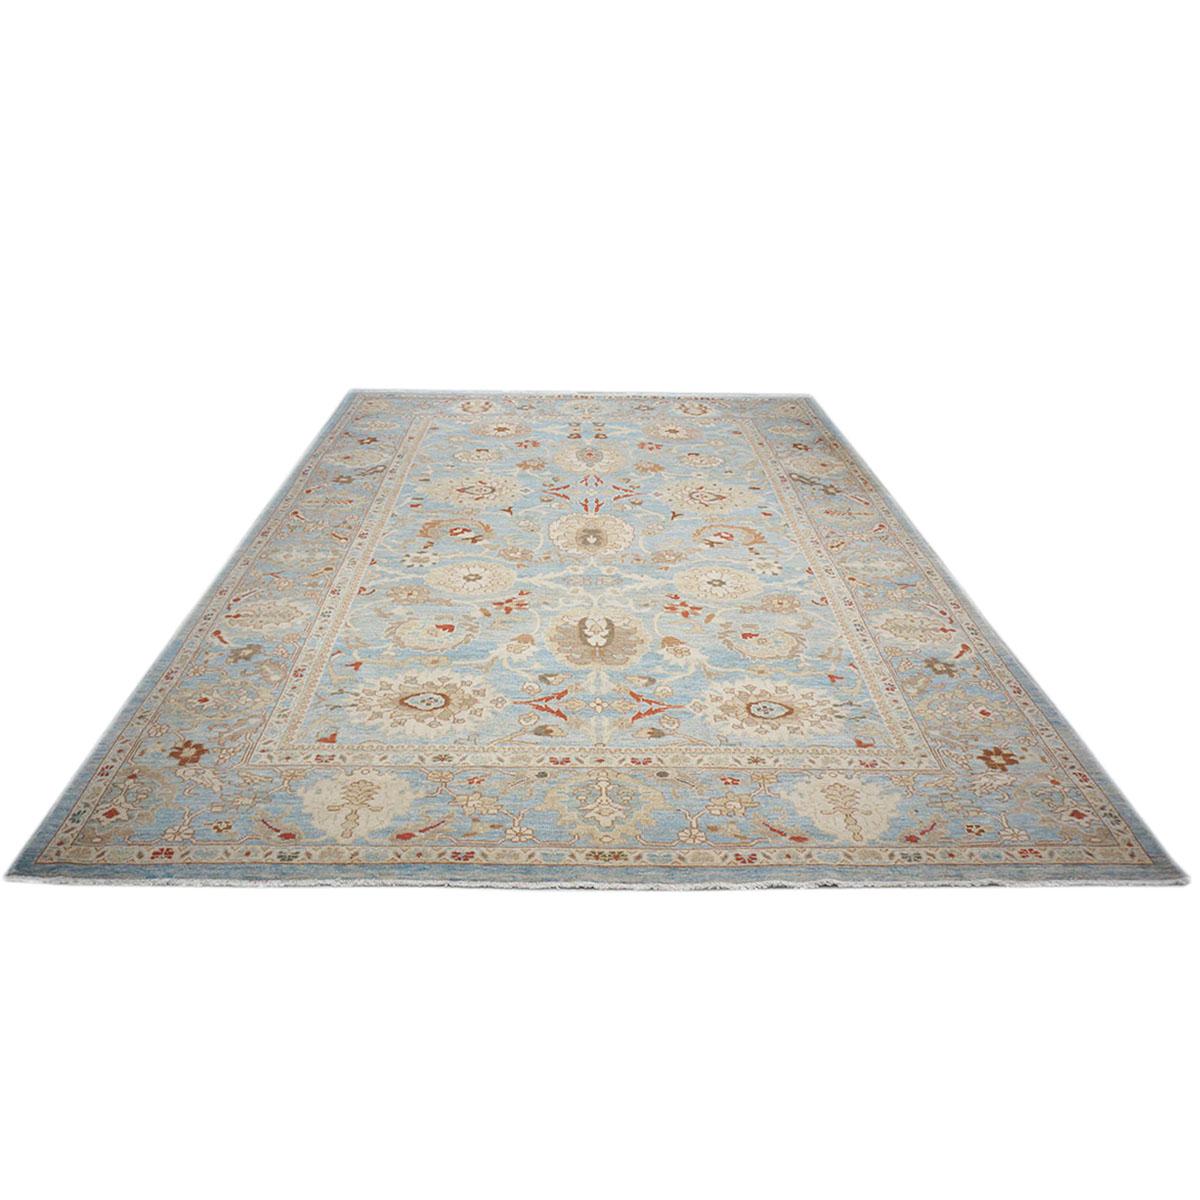 21st Century Persian Sultanabad 9x12 Blue, Ivory, & Tan Handmade Area Rug In Excellent Condition For Sale In Houston, TX